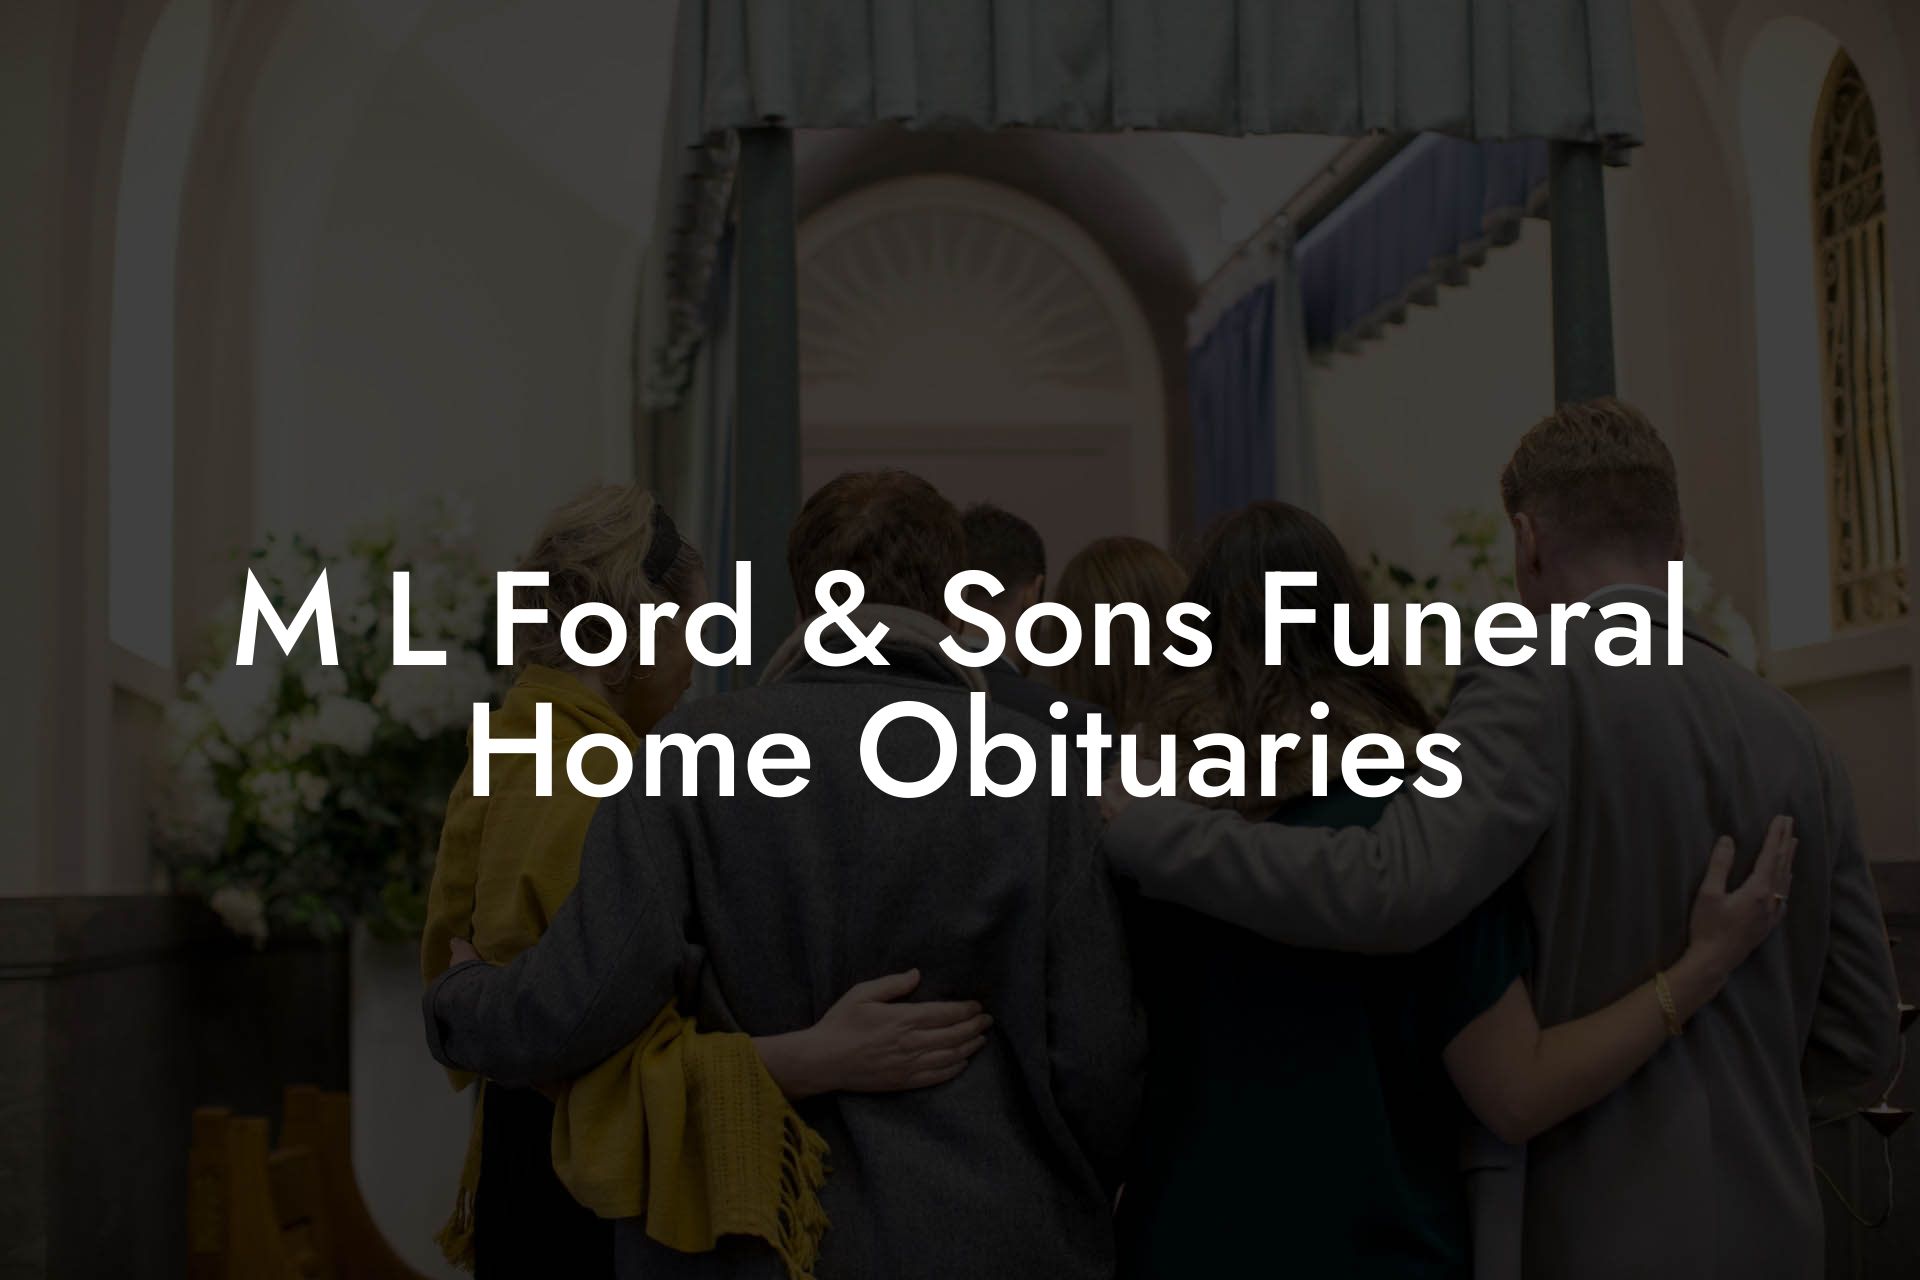 M L Ford & Sons Funeral Home Obituaries